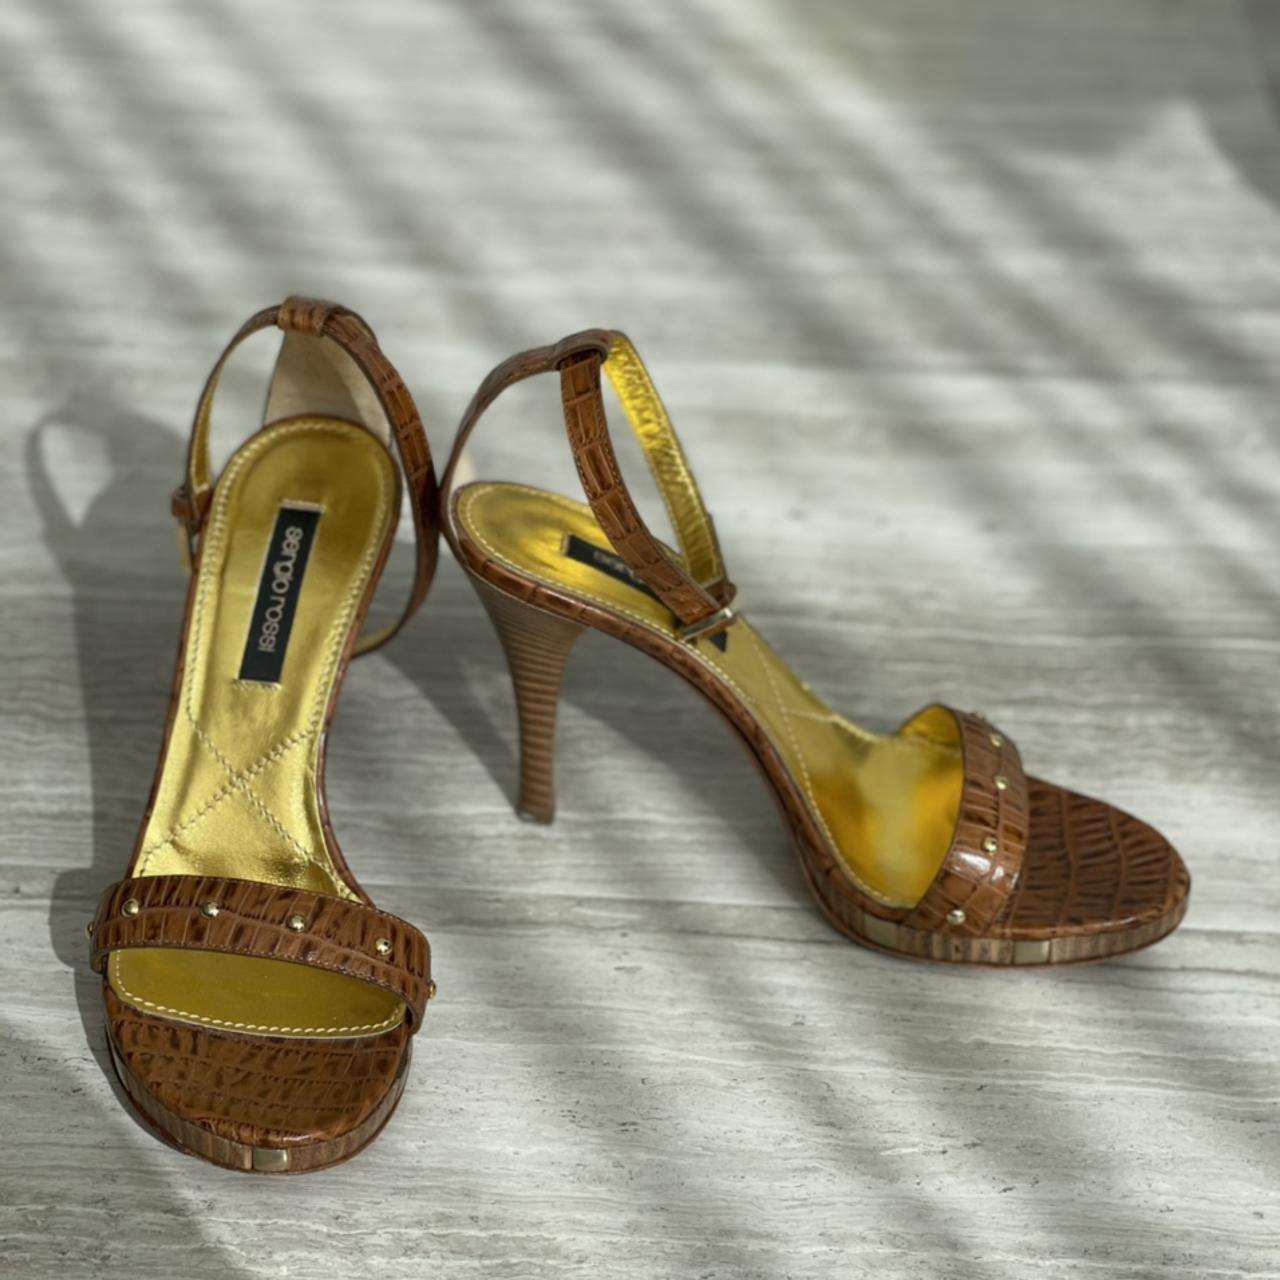 Sergio Rossi Women's Tan and Brown Sandals (2)